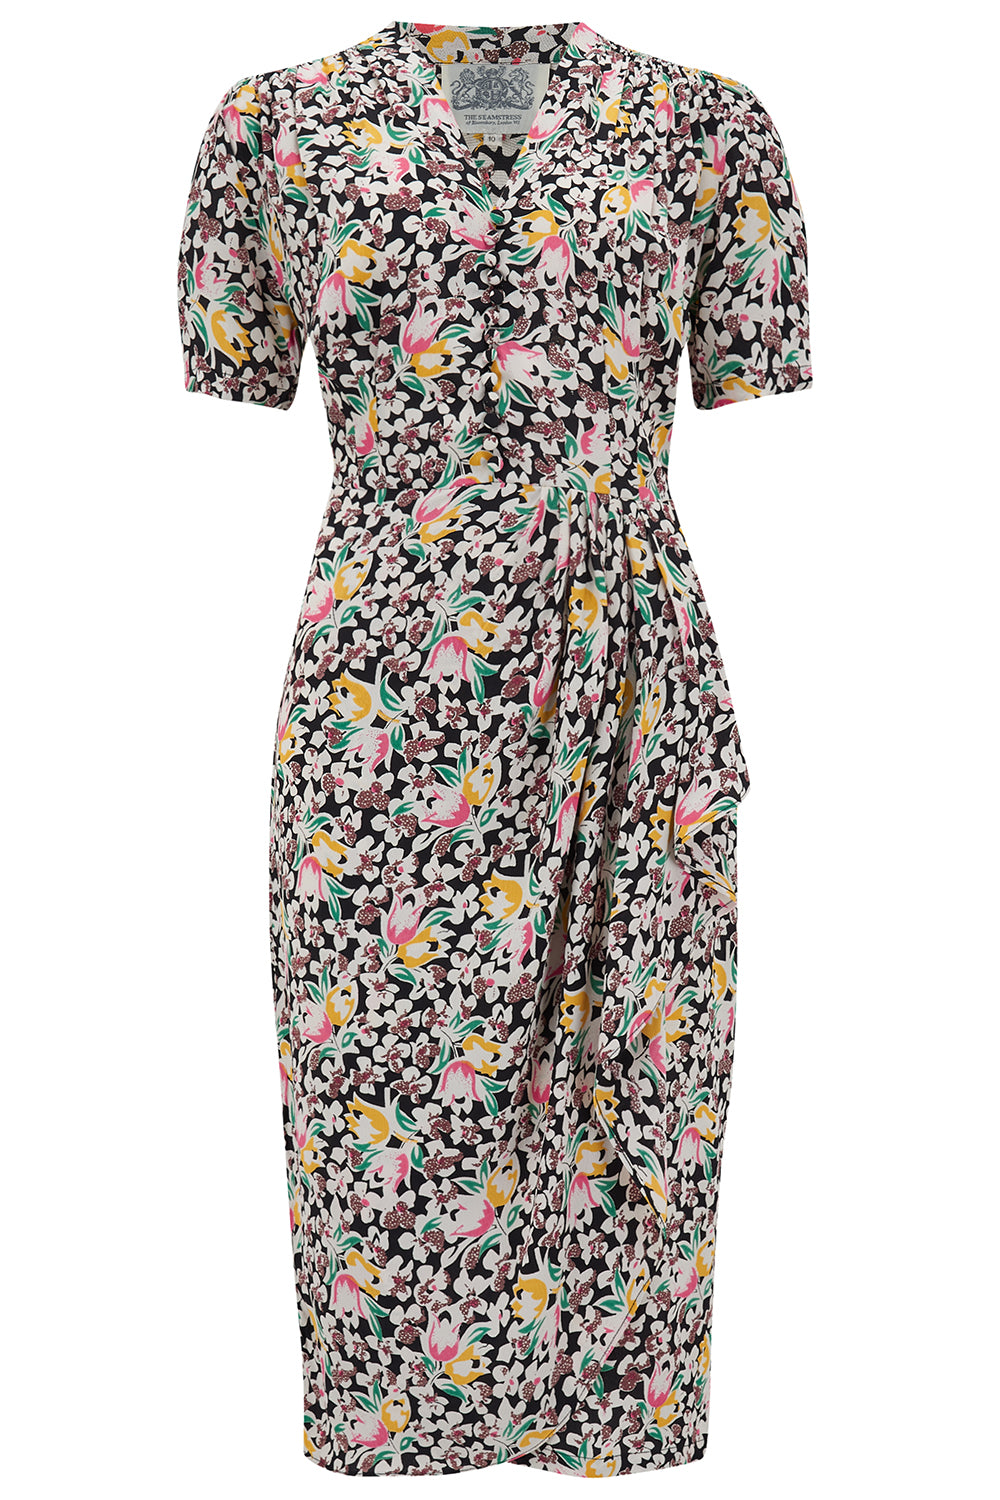 "Mabel" Dress in Tulip Print, A Classic 1940s Inspired Vintage Style - True and authentic vintage style clothing, inspired by the Classic styles of CC41 , WW2 and the fun 1950s RocknRoll era, for everyday wear plus events like Goodwood Revival, Twinwood Festival and Viva Las Vegas Rockabilly Weekend Rock n Romance The Seamstress of Bloomsbury